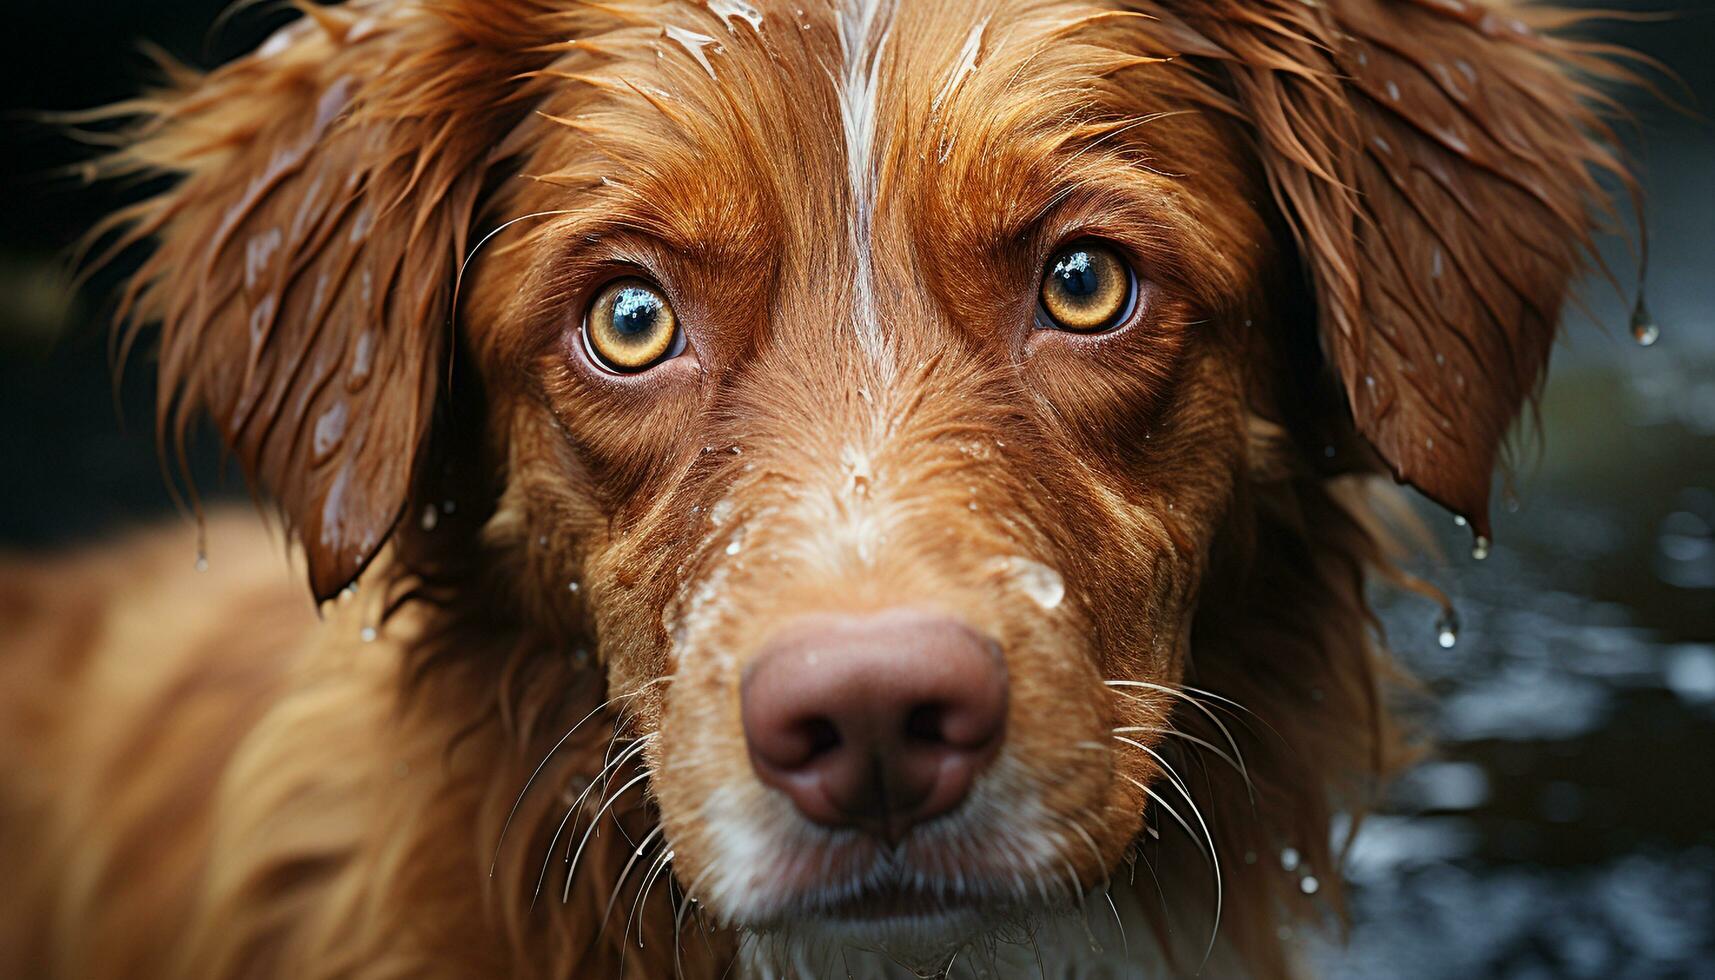 Cute puppy, wet fur, playful, looking at camera, outdoors generated by AI photo